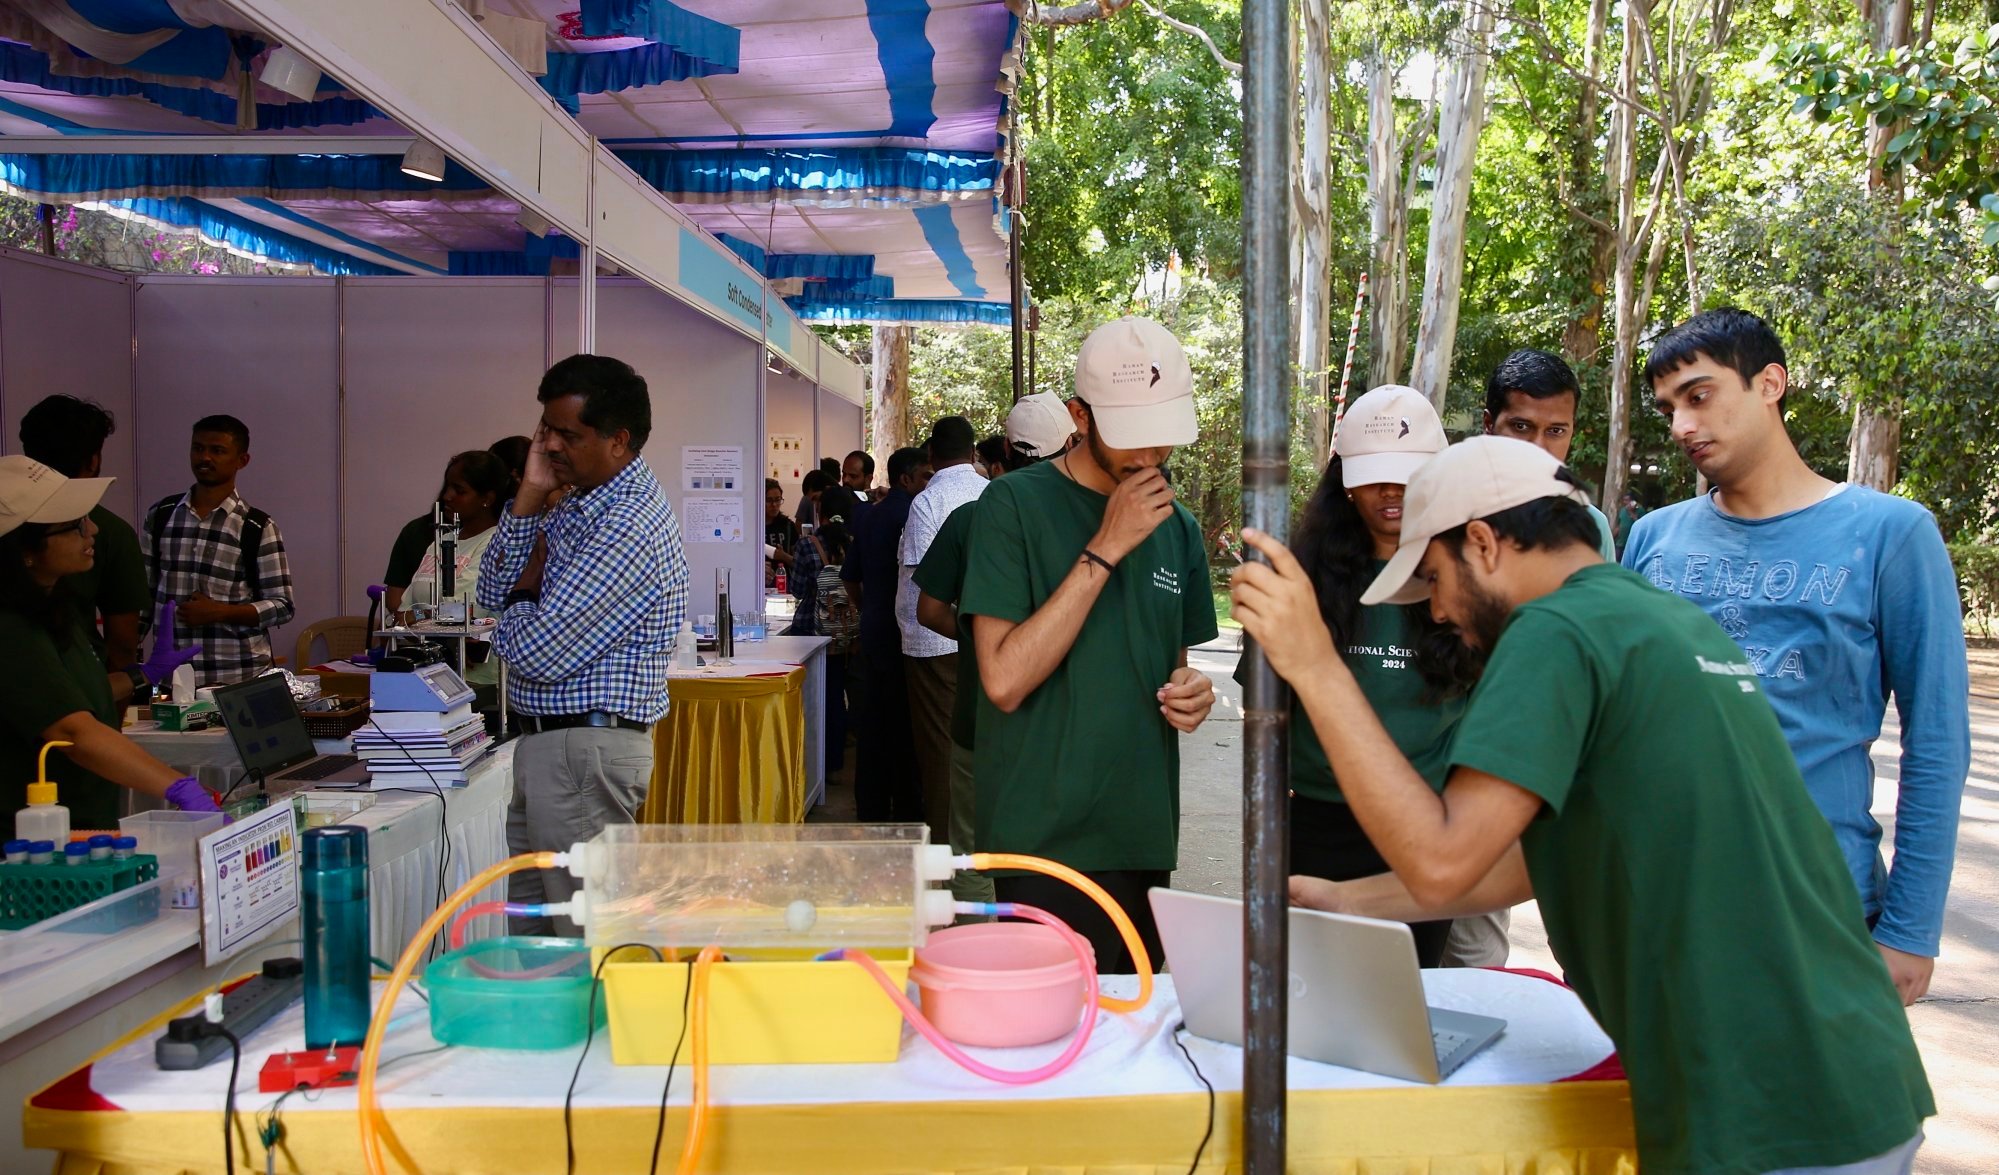 Students and visitors conduct science experiments at Raman Research Institute in Bangalore during a recent open day. India boasts world-class institutions for tertiary education, but needs to invest more in other areas. Photo: EPA-EFE